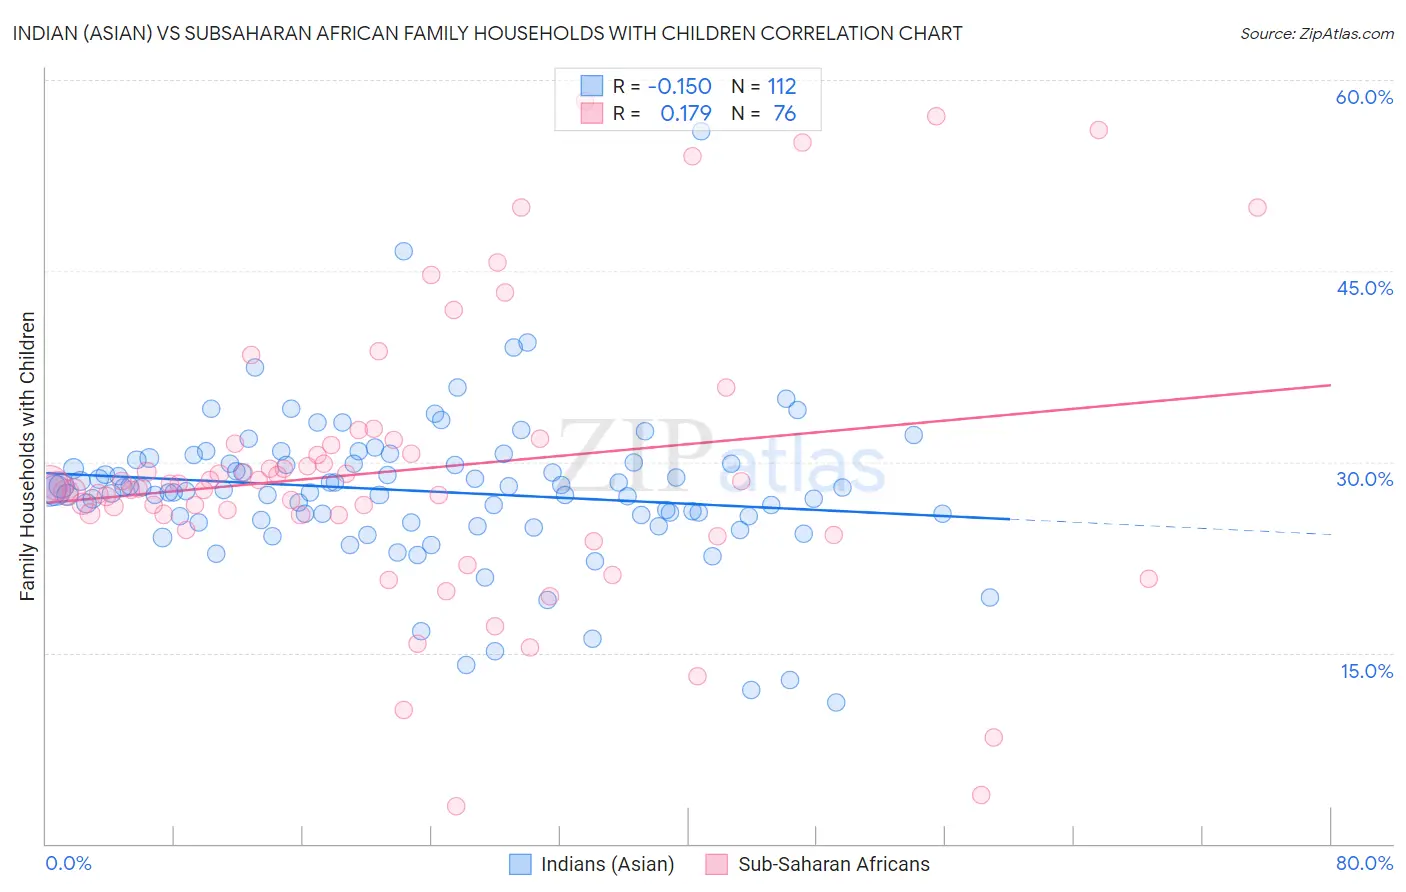 Indian (Asian) vs Subsaharan African Family Households with Children